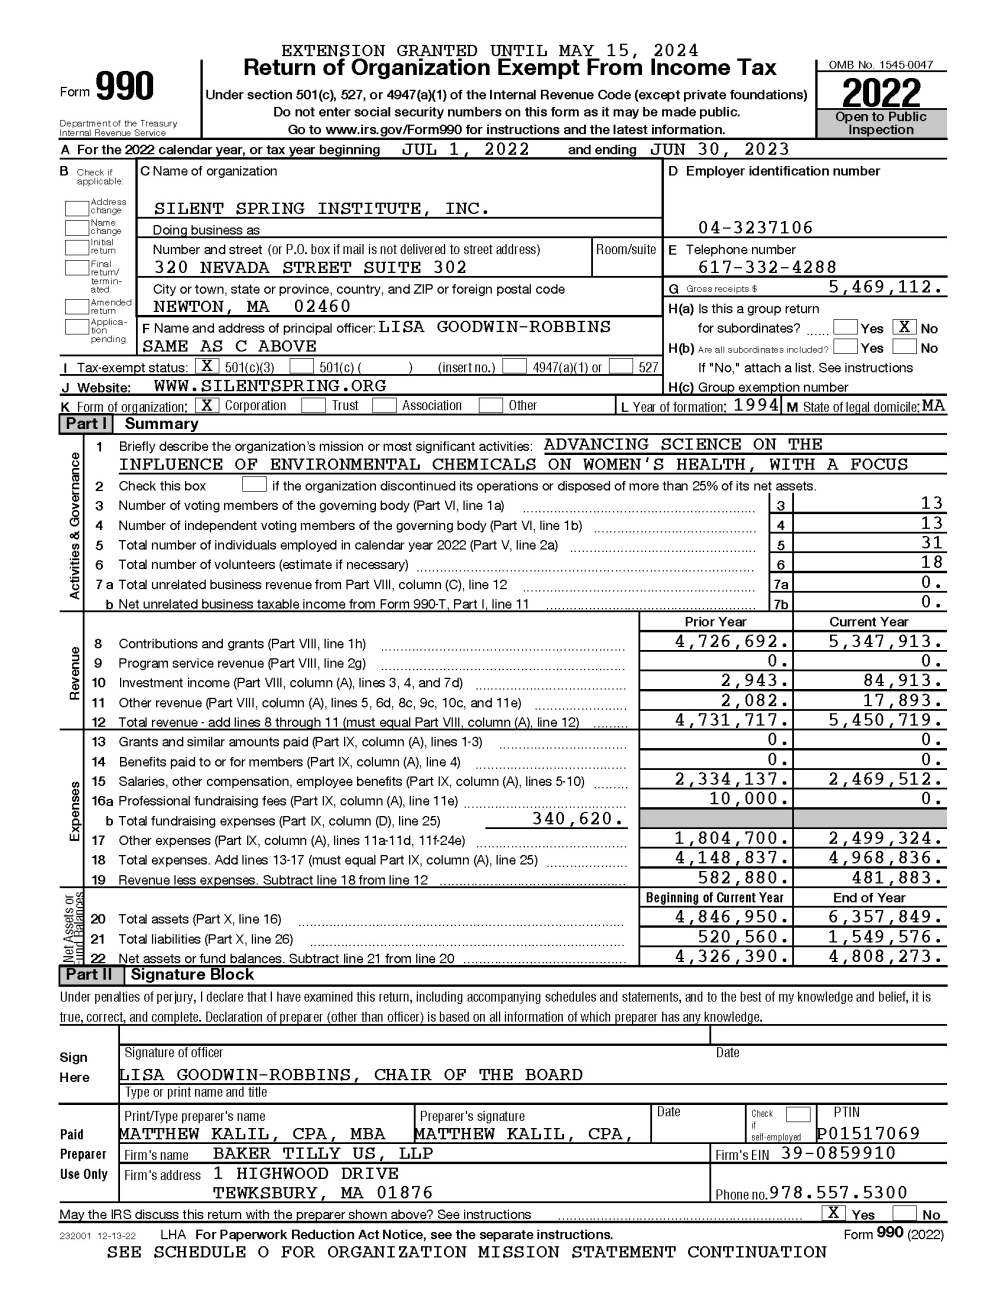 2022 IRS Form 990 (FY23) cover page